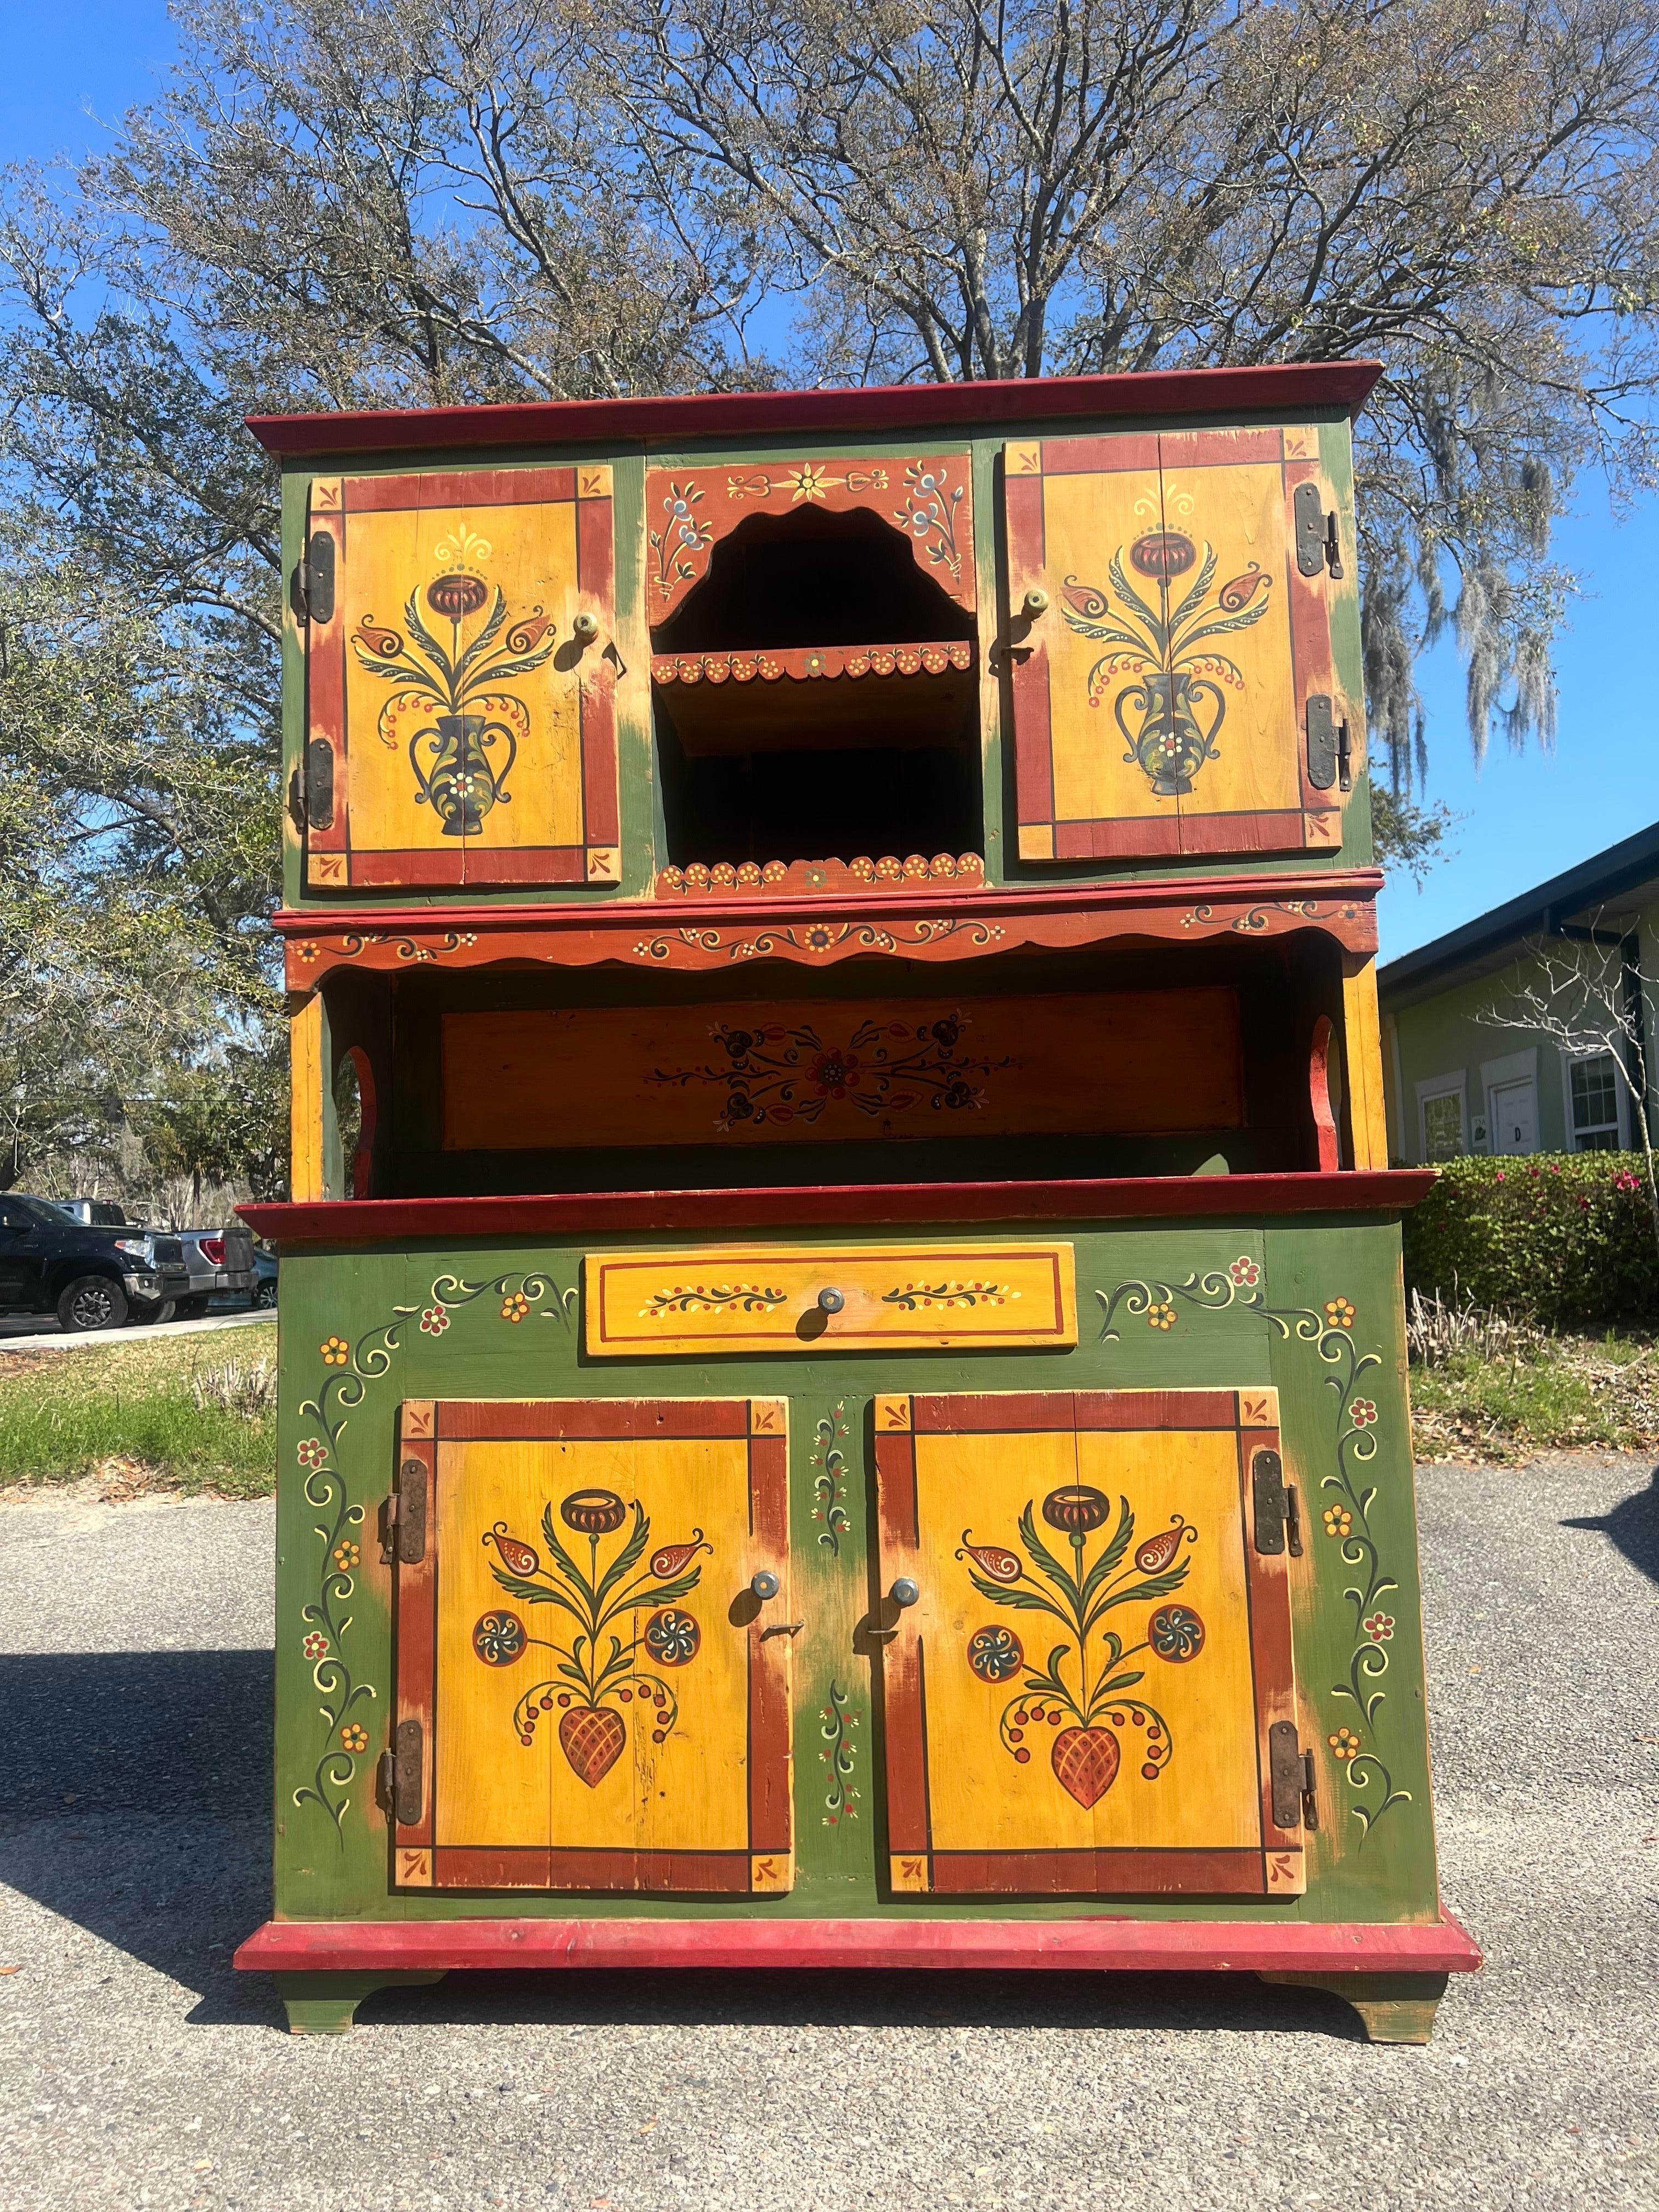 This lovely 2 piece cabinet has a beautiful floral design with the main colors being yellow, green, and a rustic red. The lower portion has 2 doors with a single removable shelf inside. Original hardware throughout the piece. The top with open